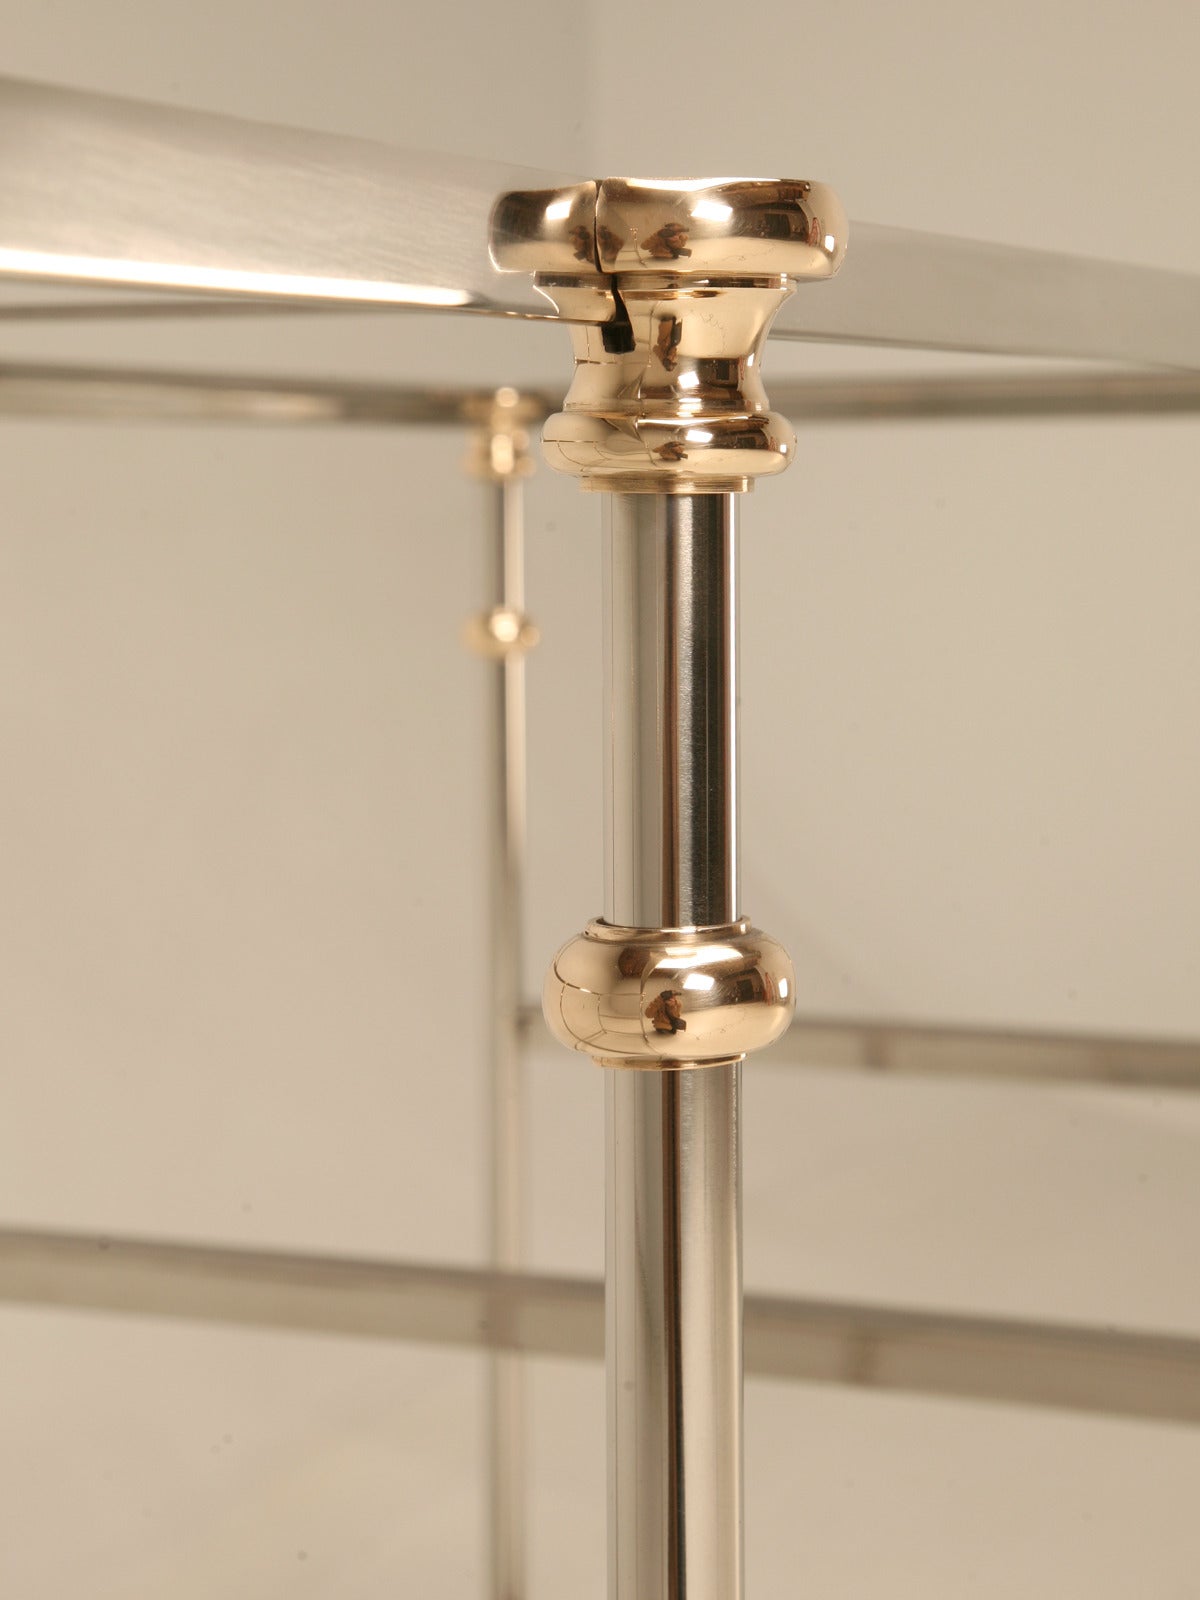 Hand-Crafted French Inspired Kitchen Island Frame, Stainless and Brass Available in Any Size For Sale